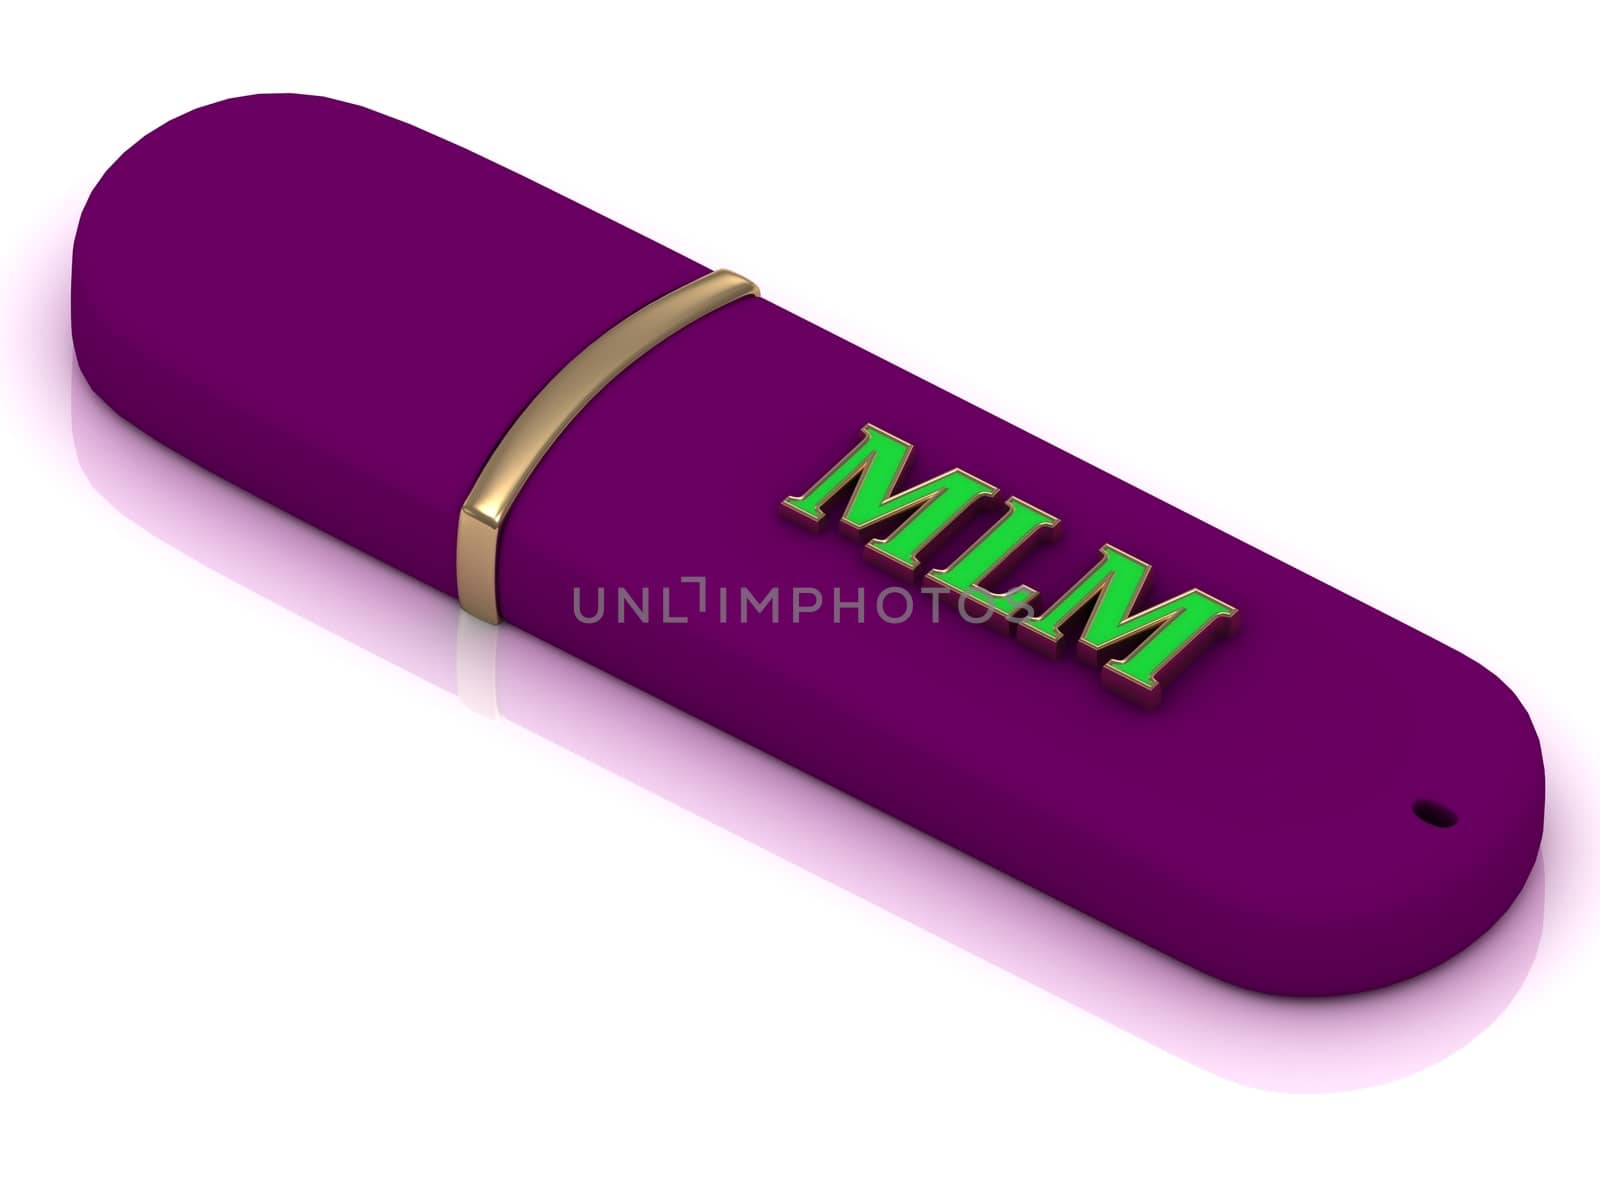 MLM flash - inscription bright green volume letter on red USB flash drive by GreenMost